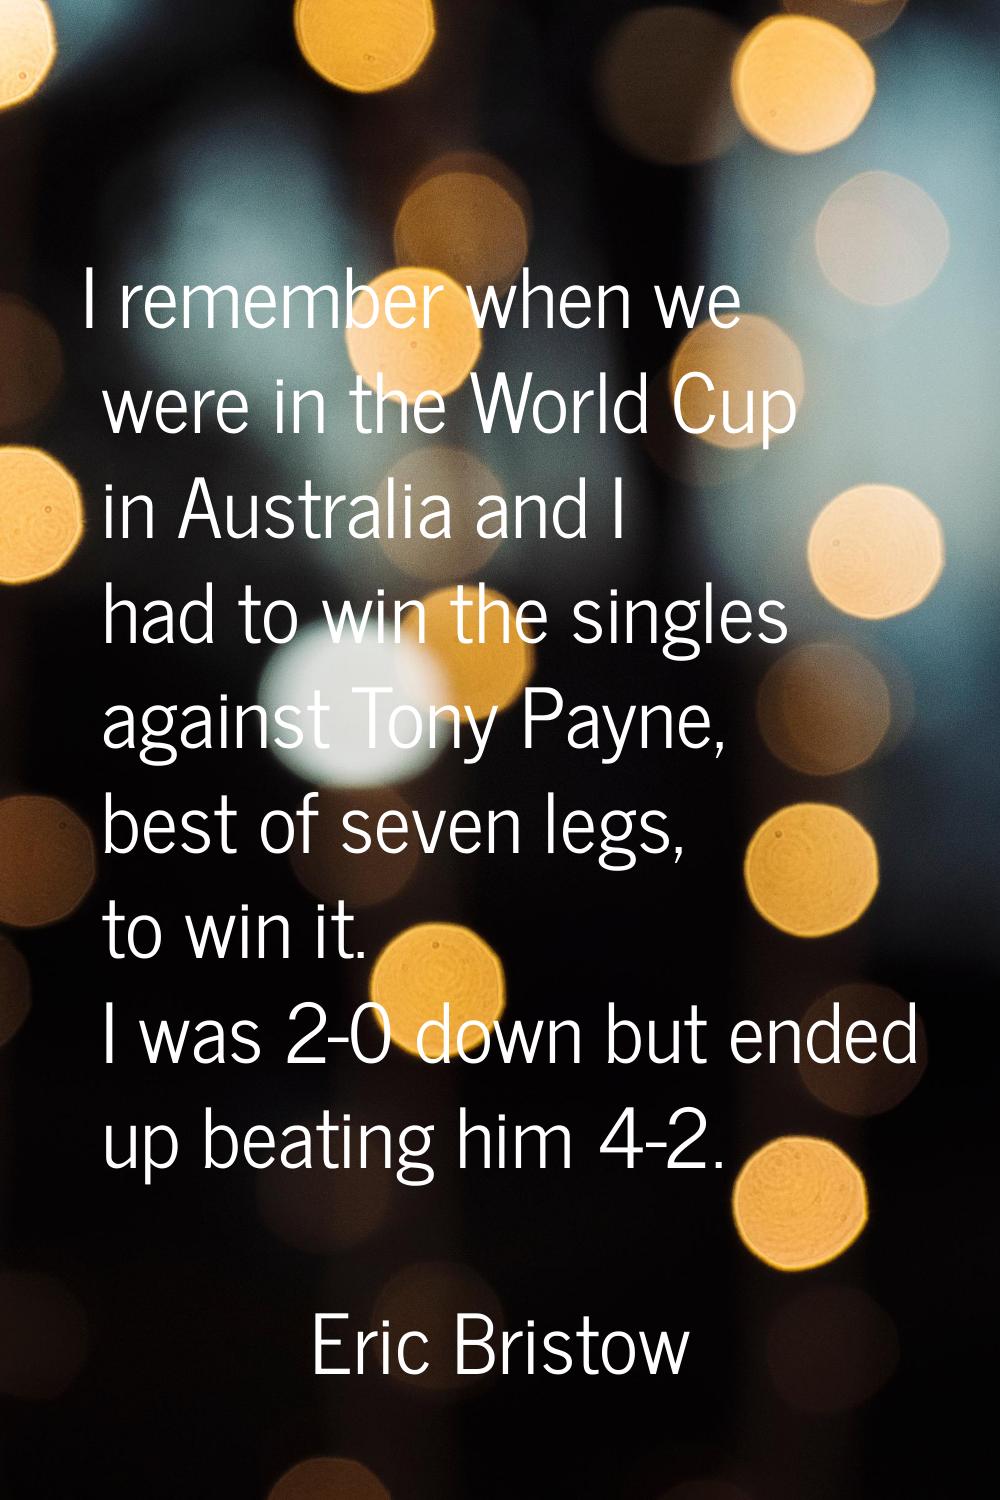 I remember when we were in the World Cup in Australia and I had to win the singles against Tony Pay